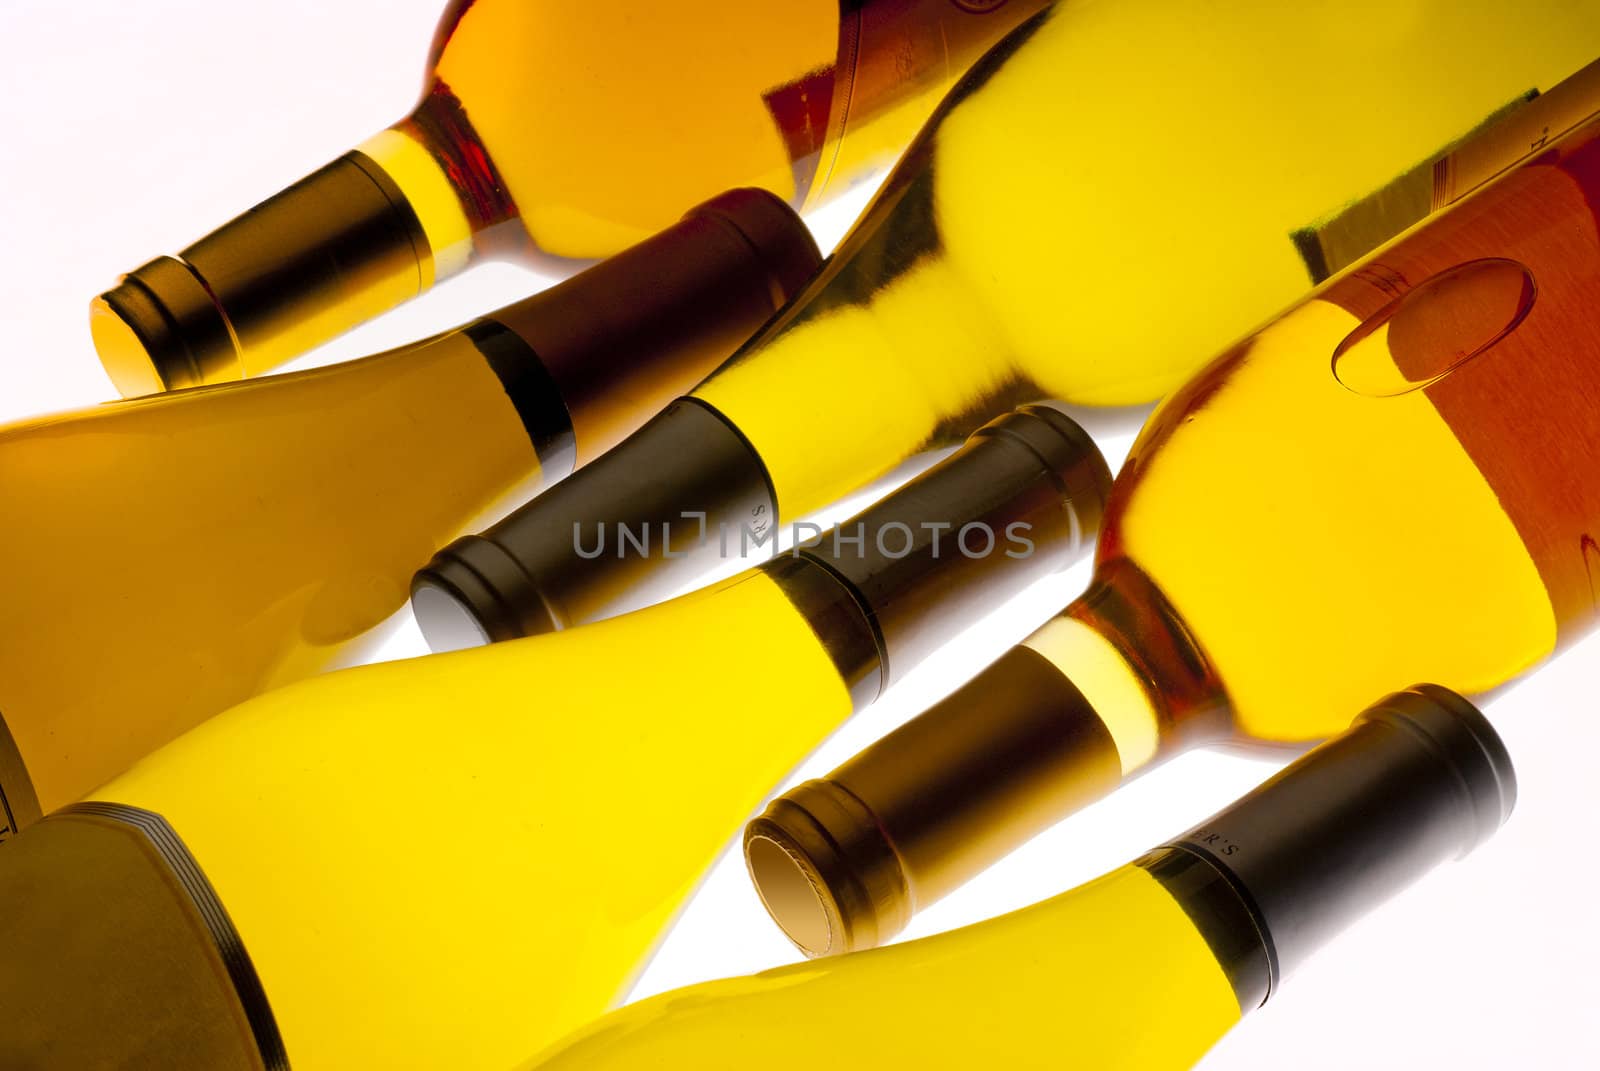 White wine bottles by f/2sumicron